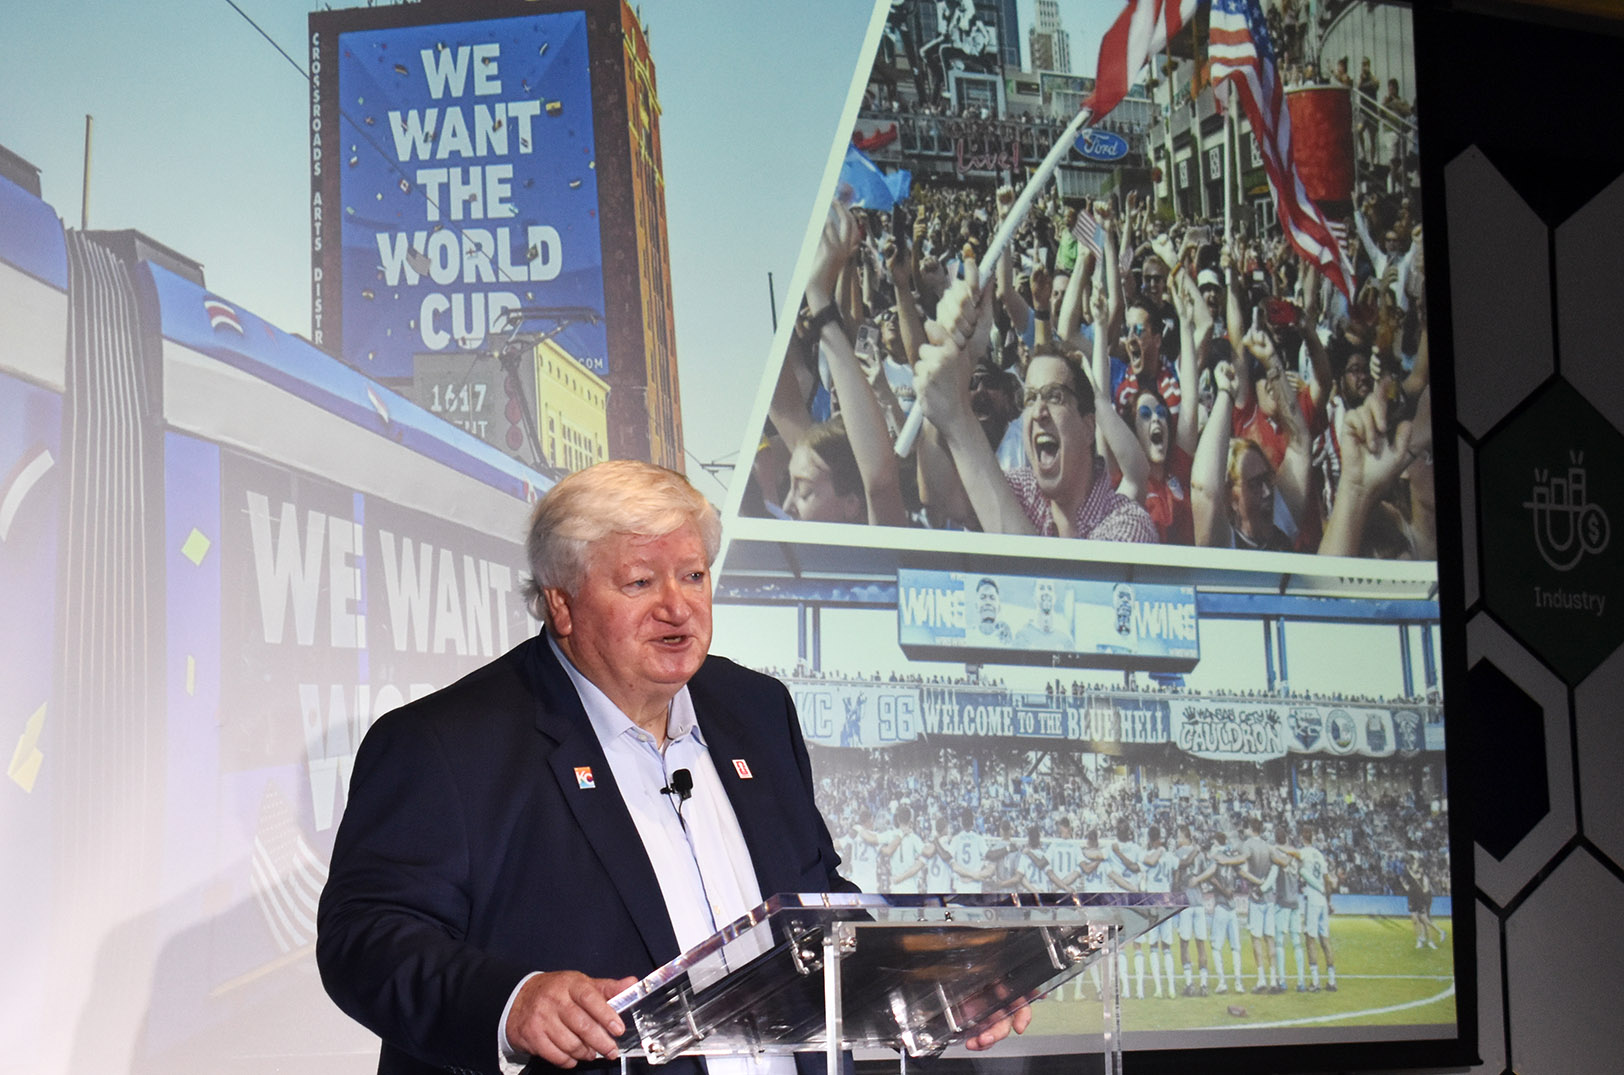 World Cup is coming to KC (and so are the asks): How leaders must boost the region before 2026